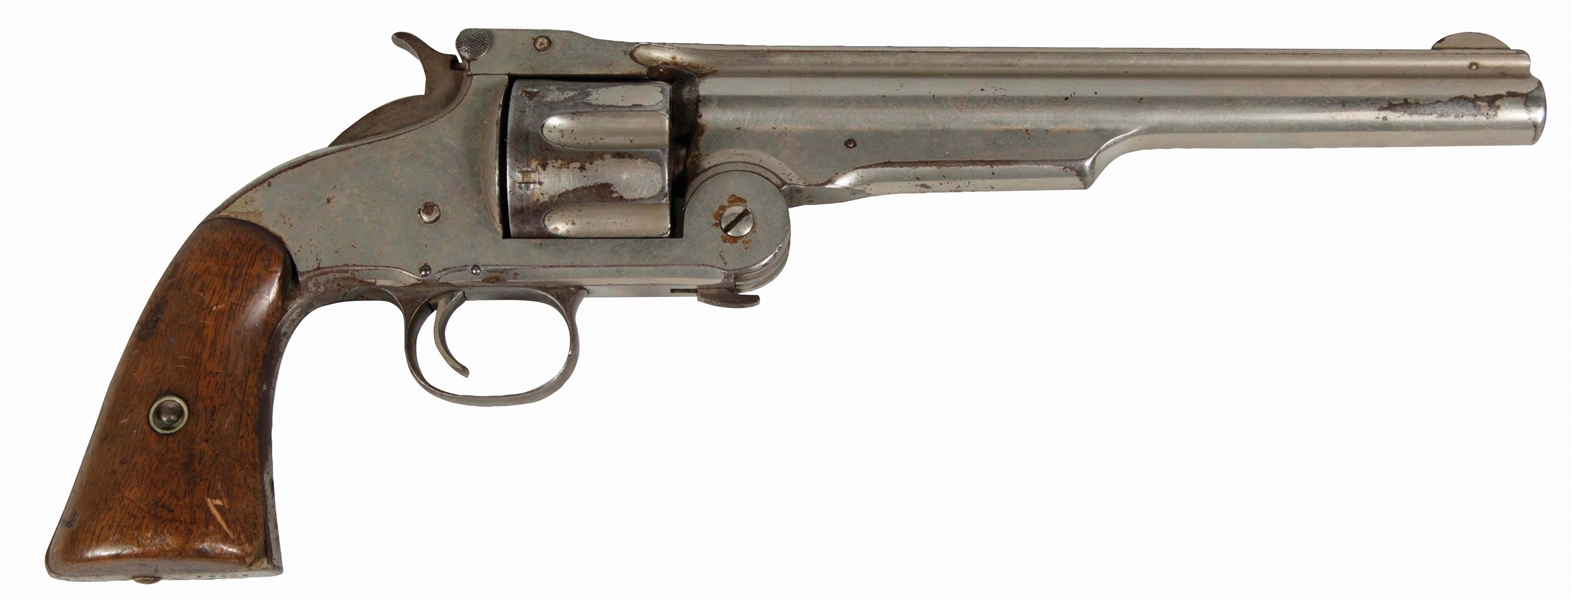 (A) SMITH AND WESSON RUSSIAN REVOLVER.